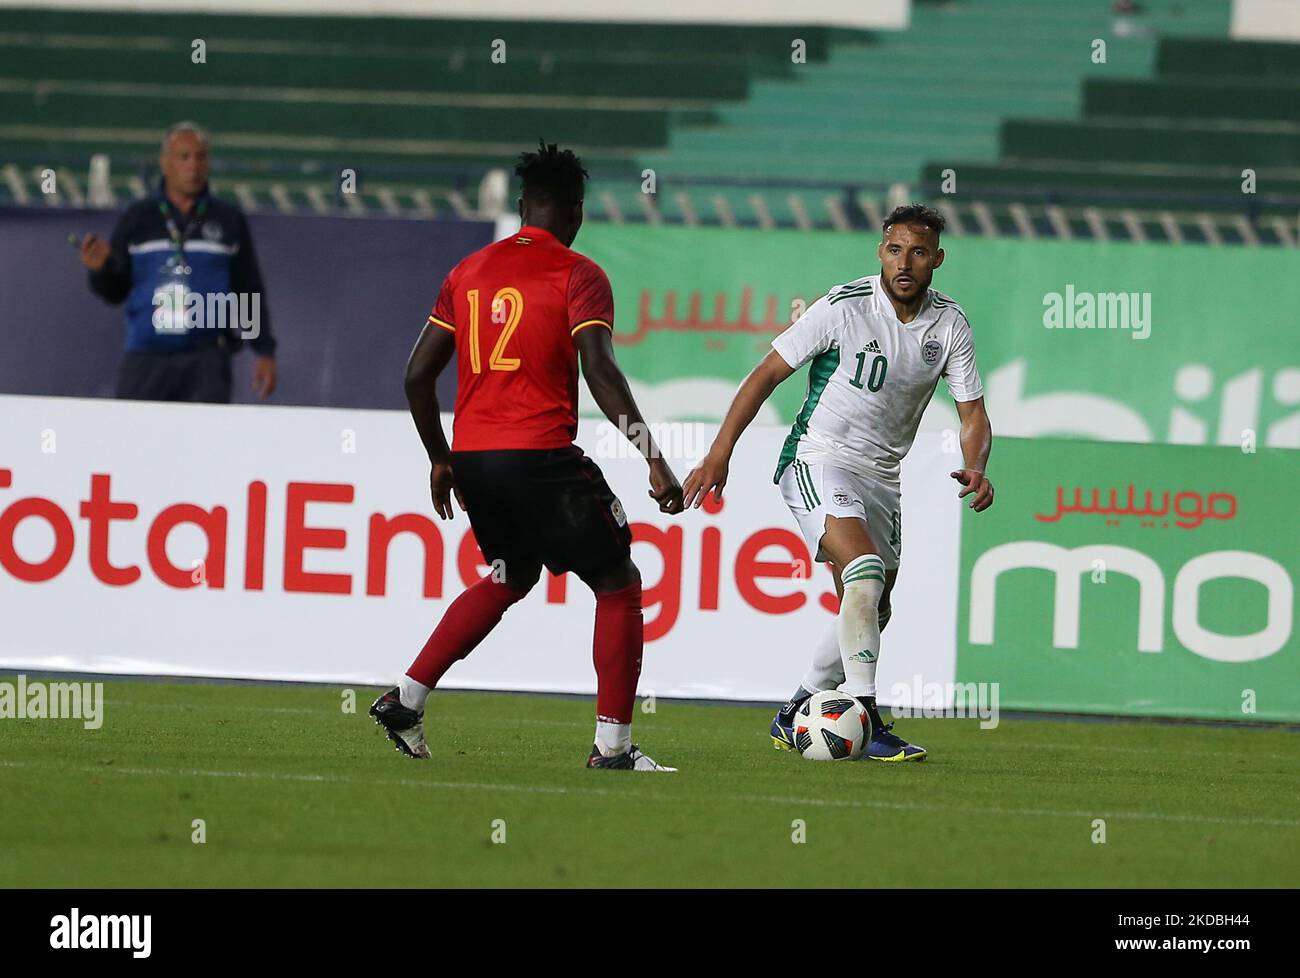 Algerian player Mohamed Youcef Belaili (R) vies for the ball with Ugandan player Kizito Mugweri Gavin (L) during the 2023 Africa Cup of Nations Qualifier soccer match between Algeria and Uganda at Stade du July 5, 1962 in Algiers, Algeria, June 4, 2022. (Photo by APP/NurPhoto) Stock Photo